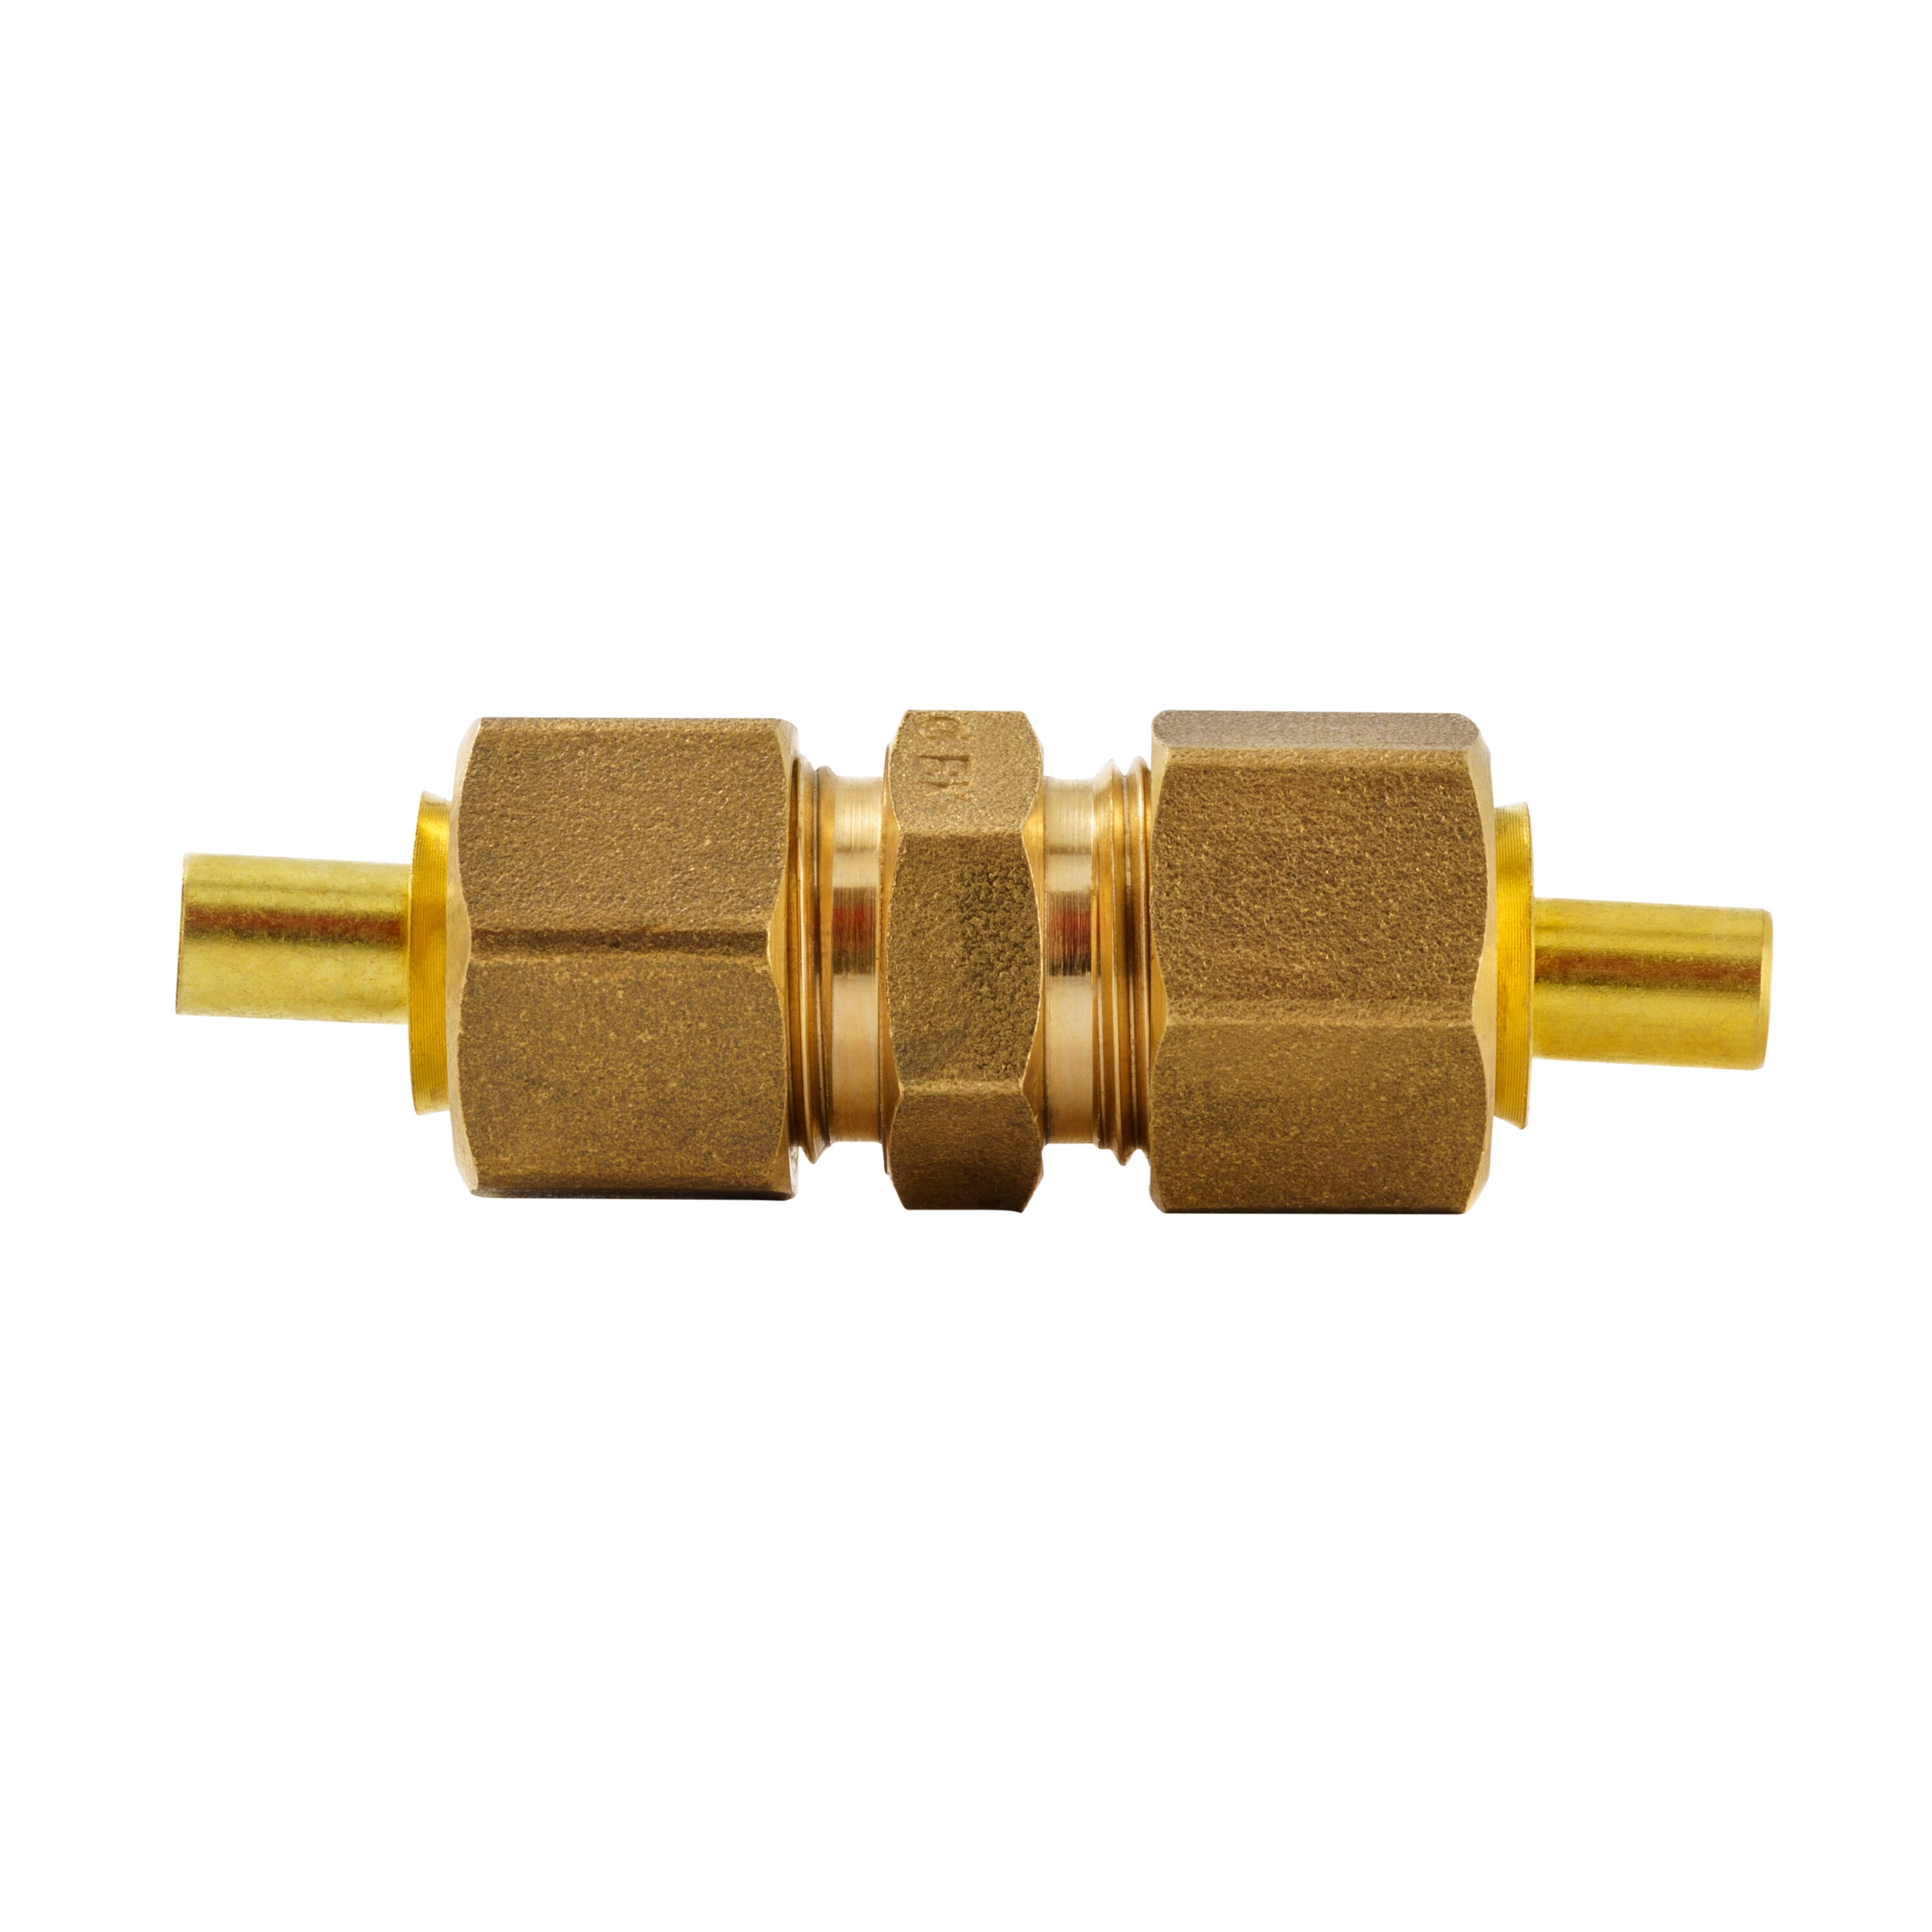 Brass Swagelok Tube Fitting, Union, 10 mm x 3/8 in. Tube OD, Unions, Tube  Fittings and Adapters, Fittings, All Products